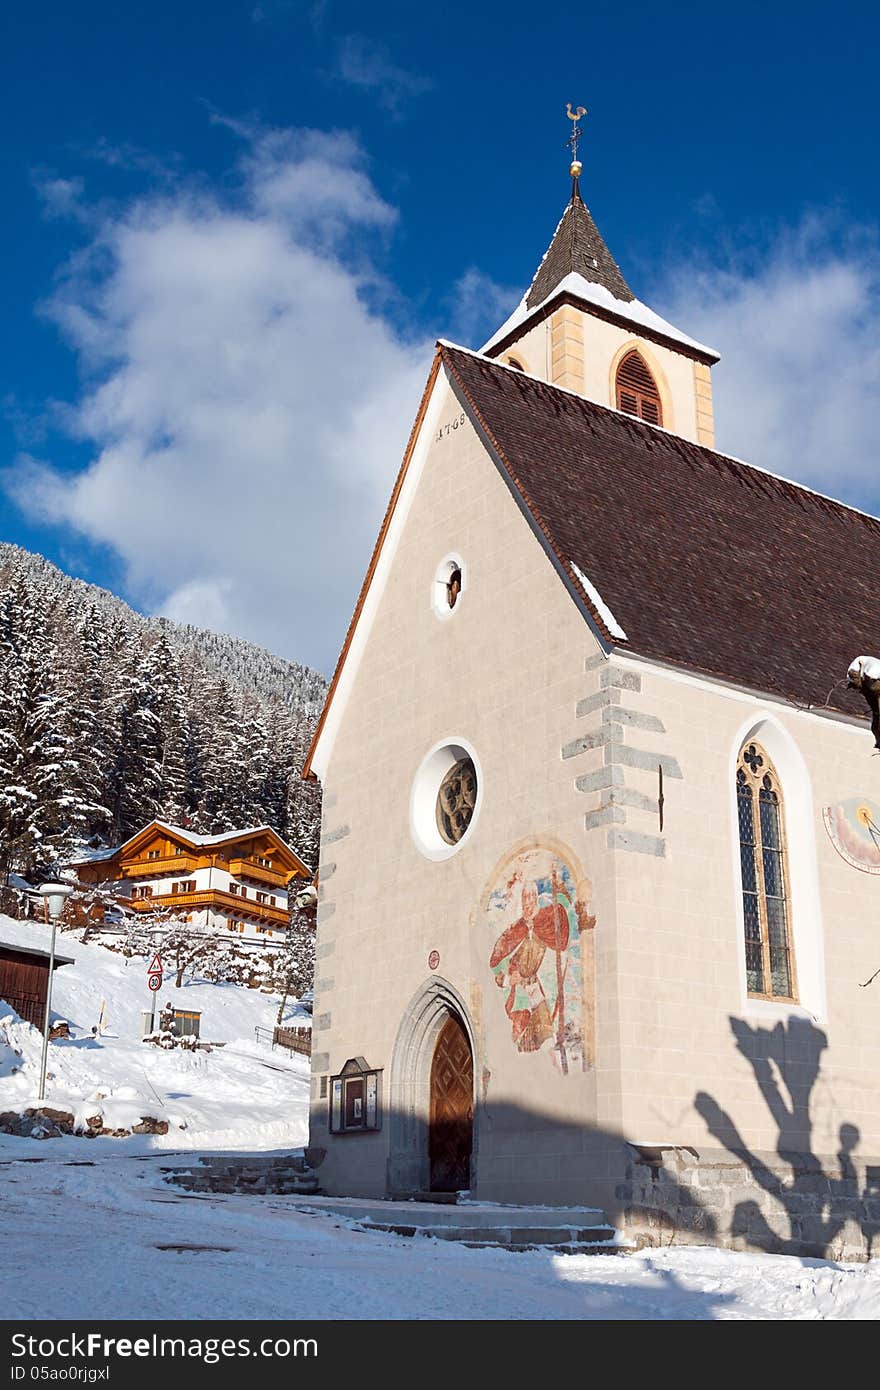 A wintertime view of a small church with a tall steeple in Vila di Sopra, Sud Tyrol